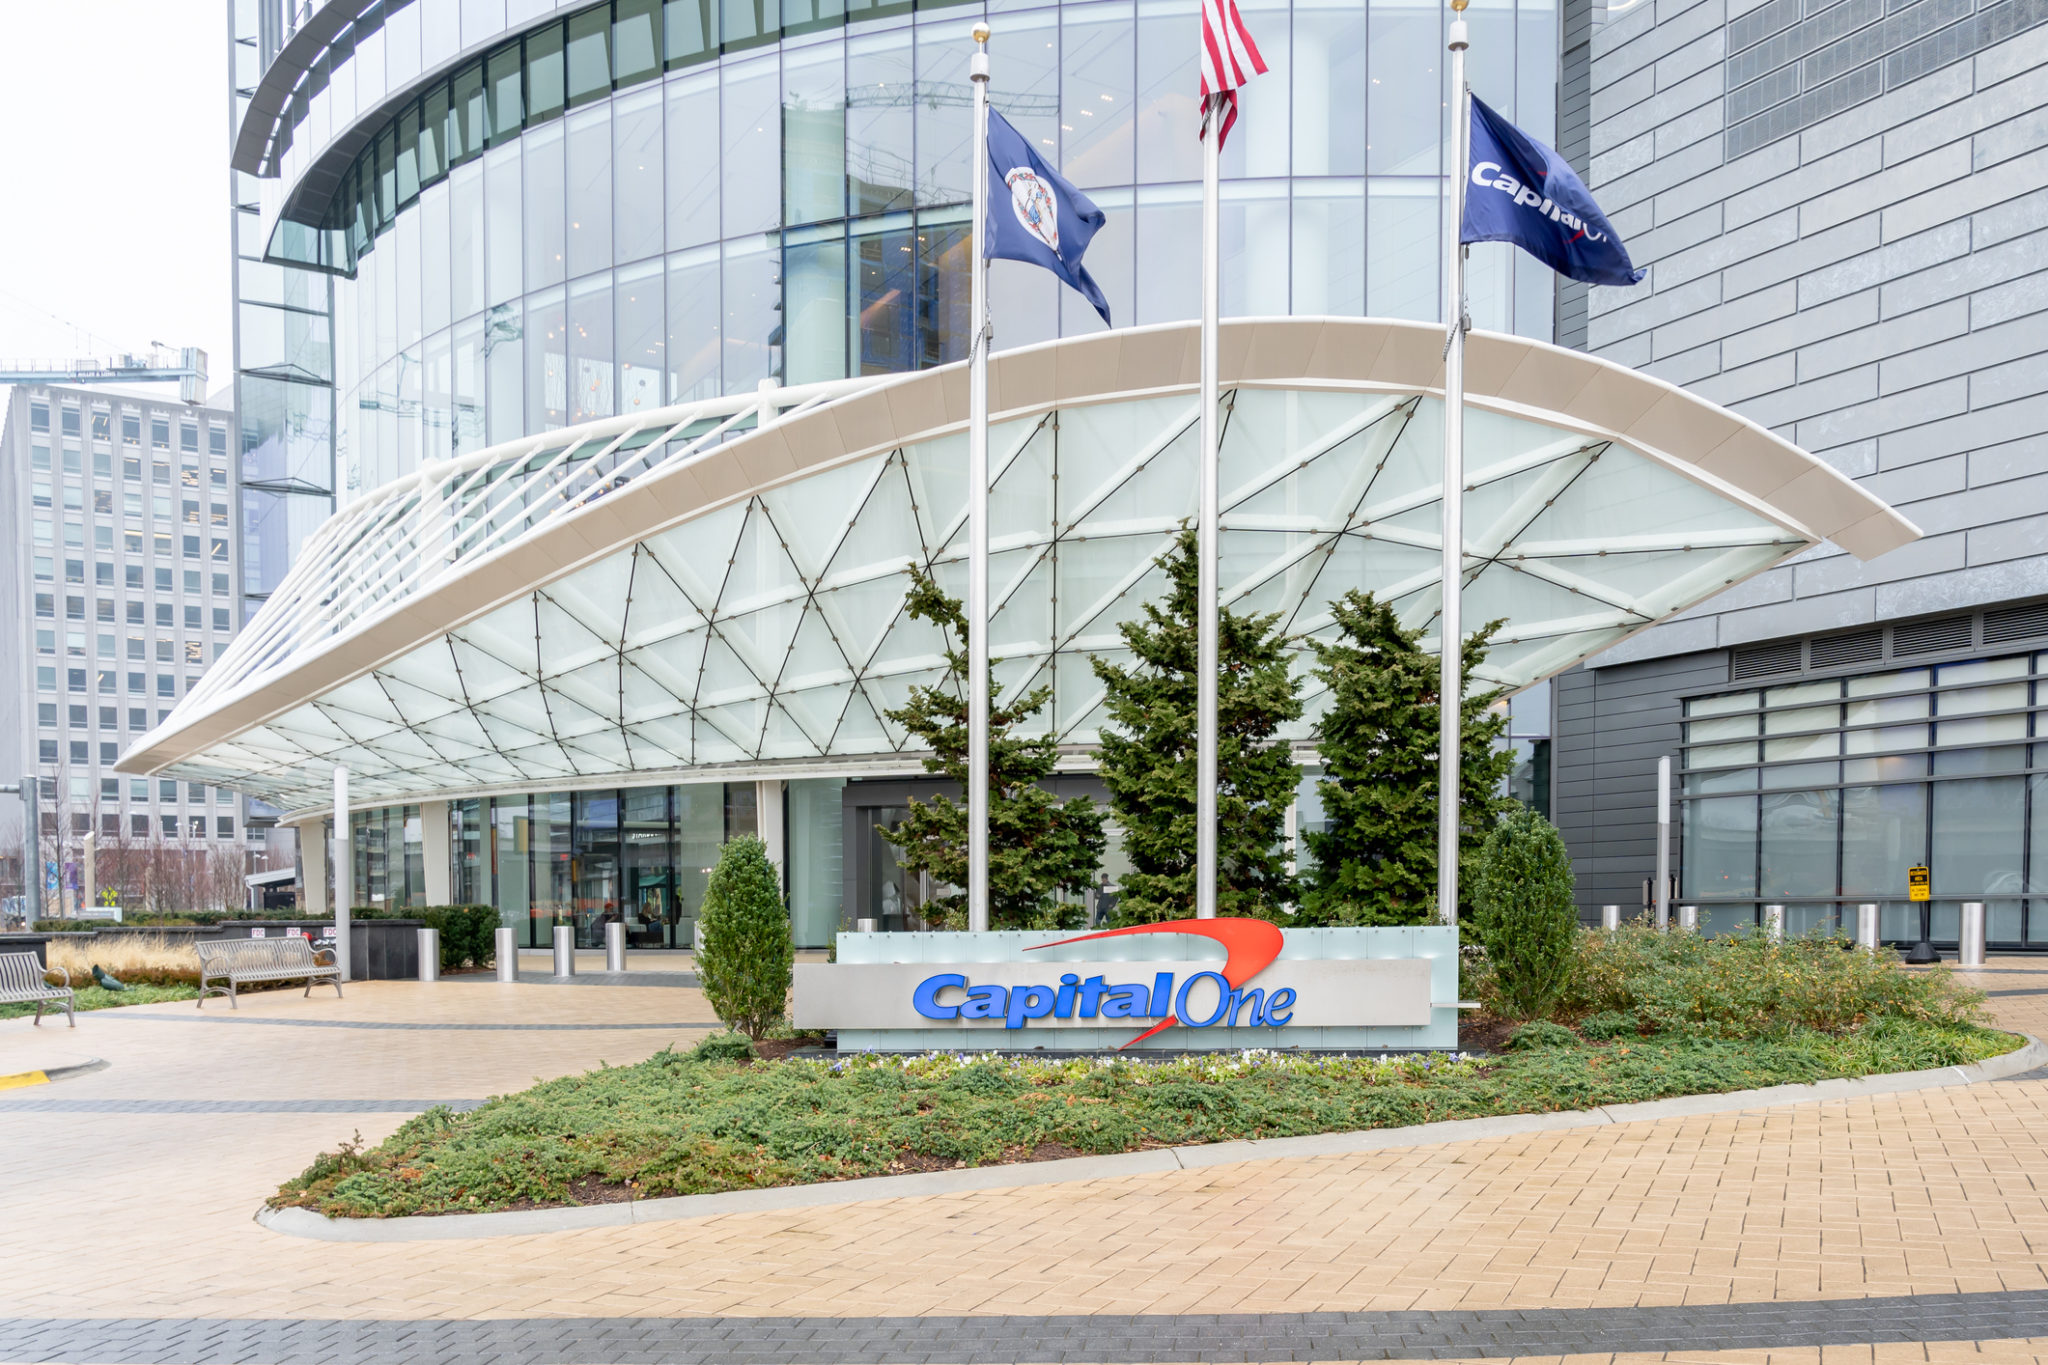 Capital one Headquarters building. Capital One Financial Corporation is capital one bank in brooklyn